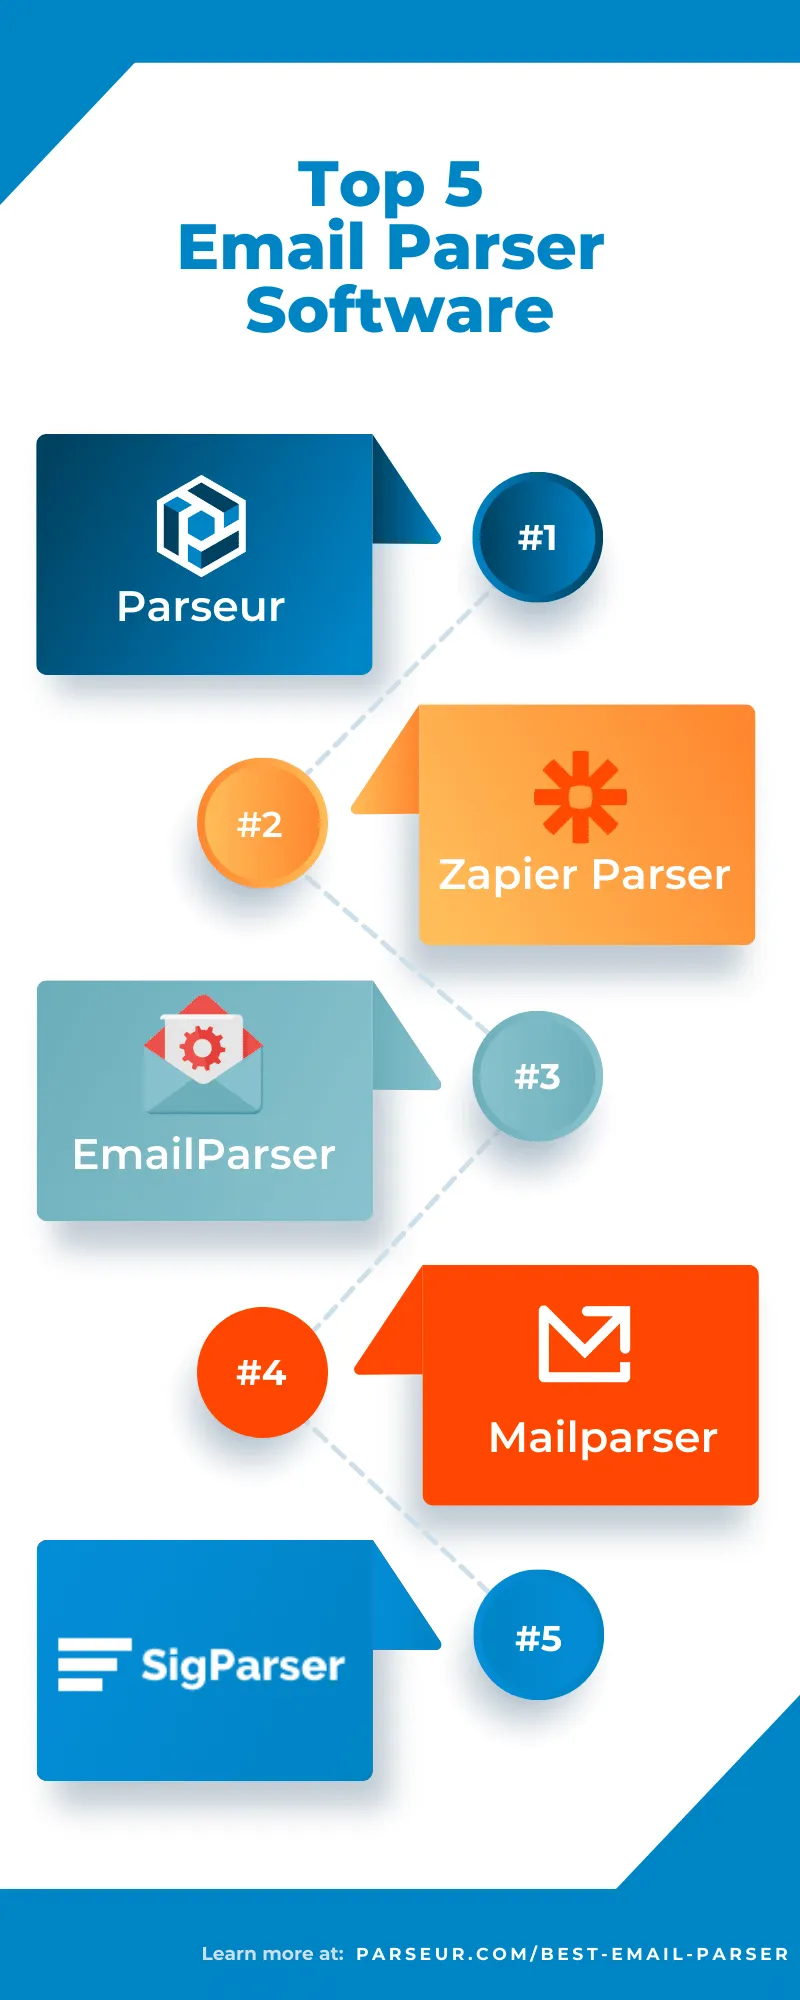 An infographic highlighting top email parser software